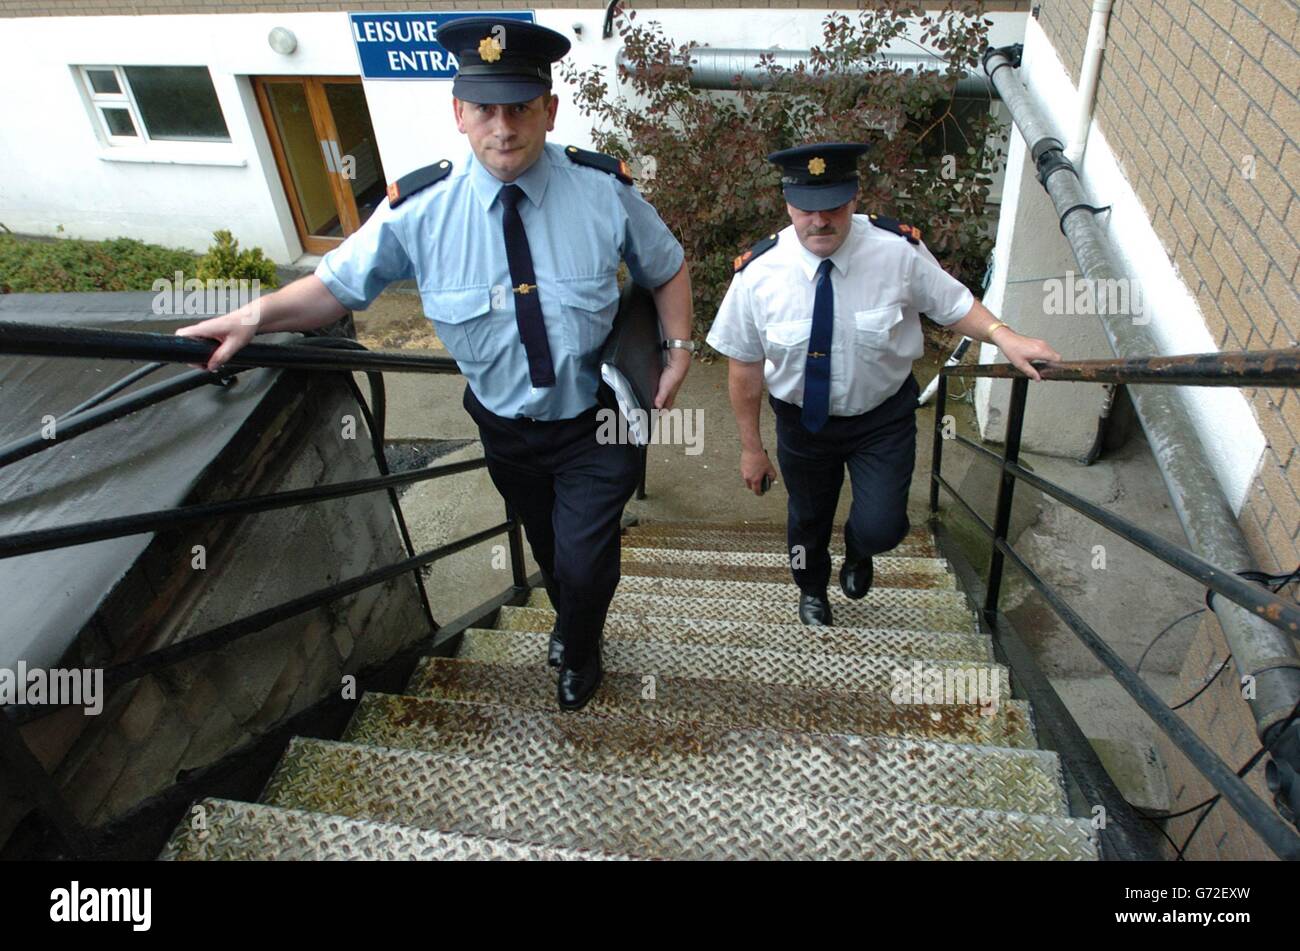 Senior Gardai from Ennis, Co Clare, Super Intendent John Kerin (R) and Inspector Moynihan, arriving at the Killeshin Hotel in Portlaoise, Co Laoise, where they met with members of the Stop Bush campaign, to discuss restrictions before planned demonstrations against US Presdient, George W. Bush's visit to Dromoland Castle, Co Clare. Stock Photo